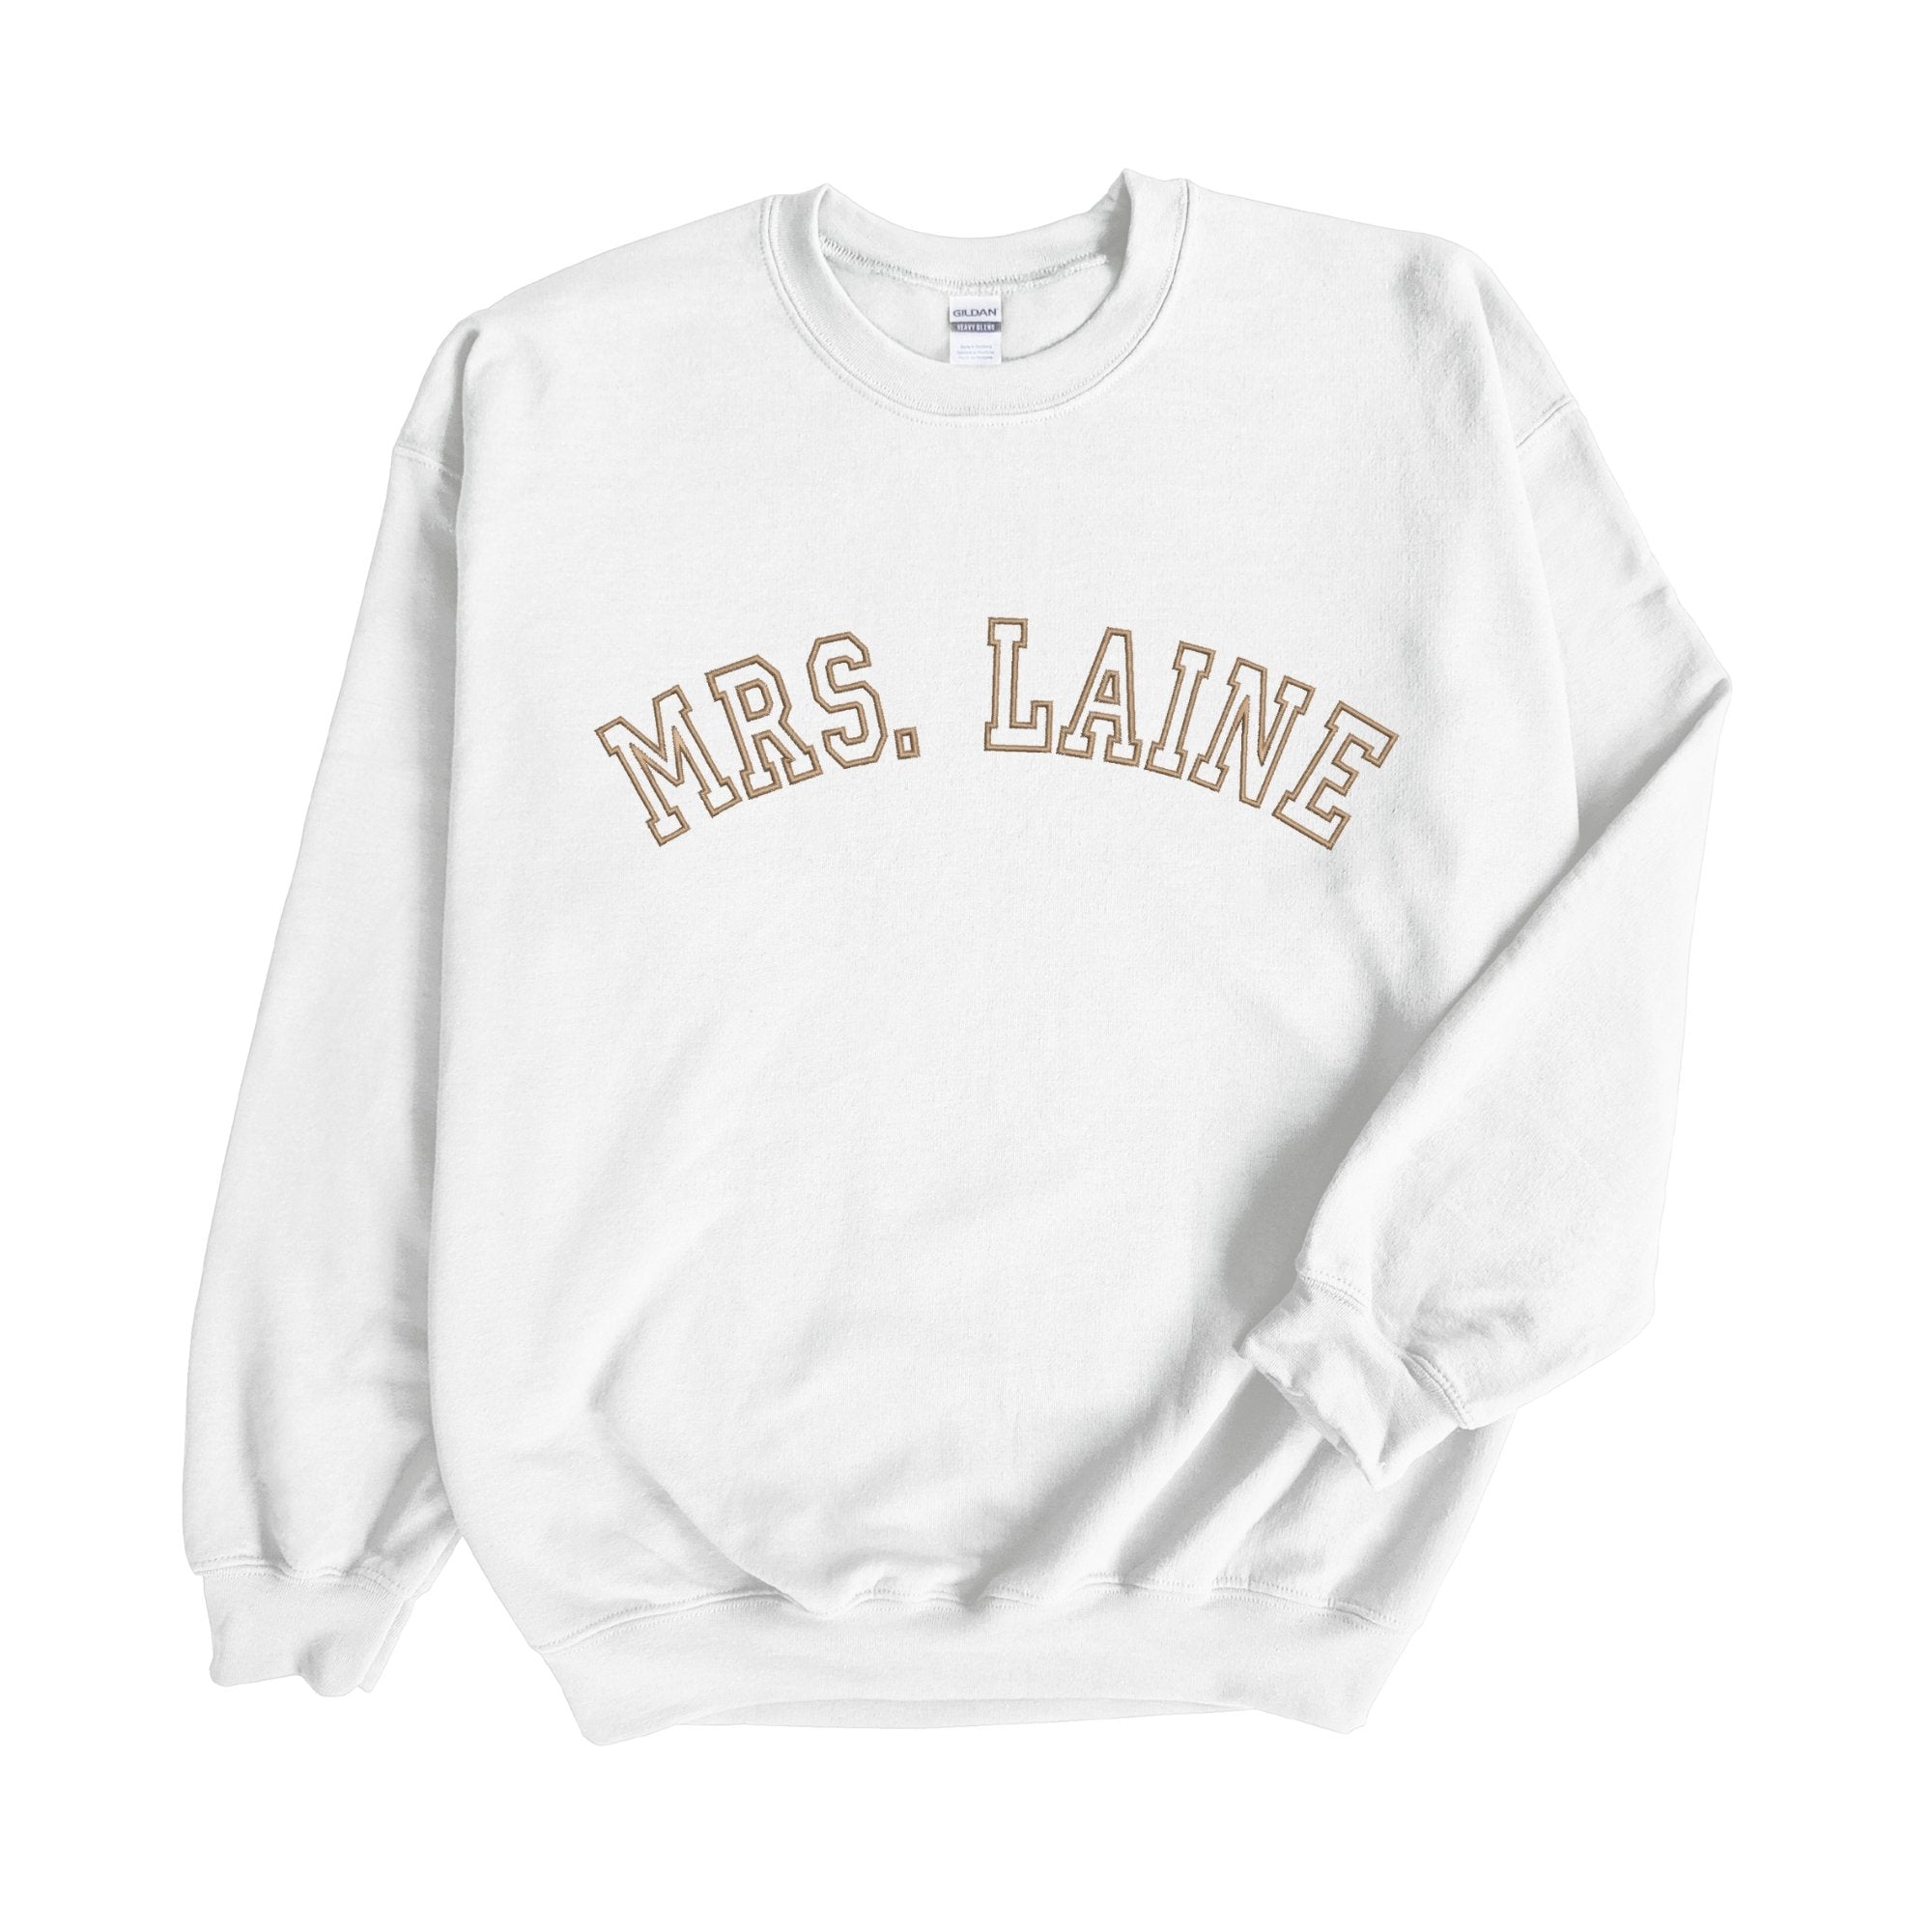 New Brand Luxury Letters Embroidery Sweatshirt - white / S